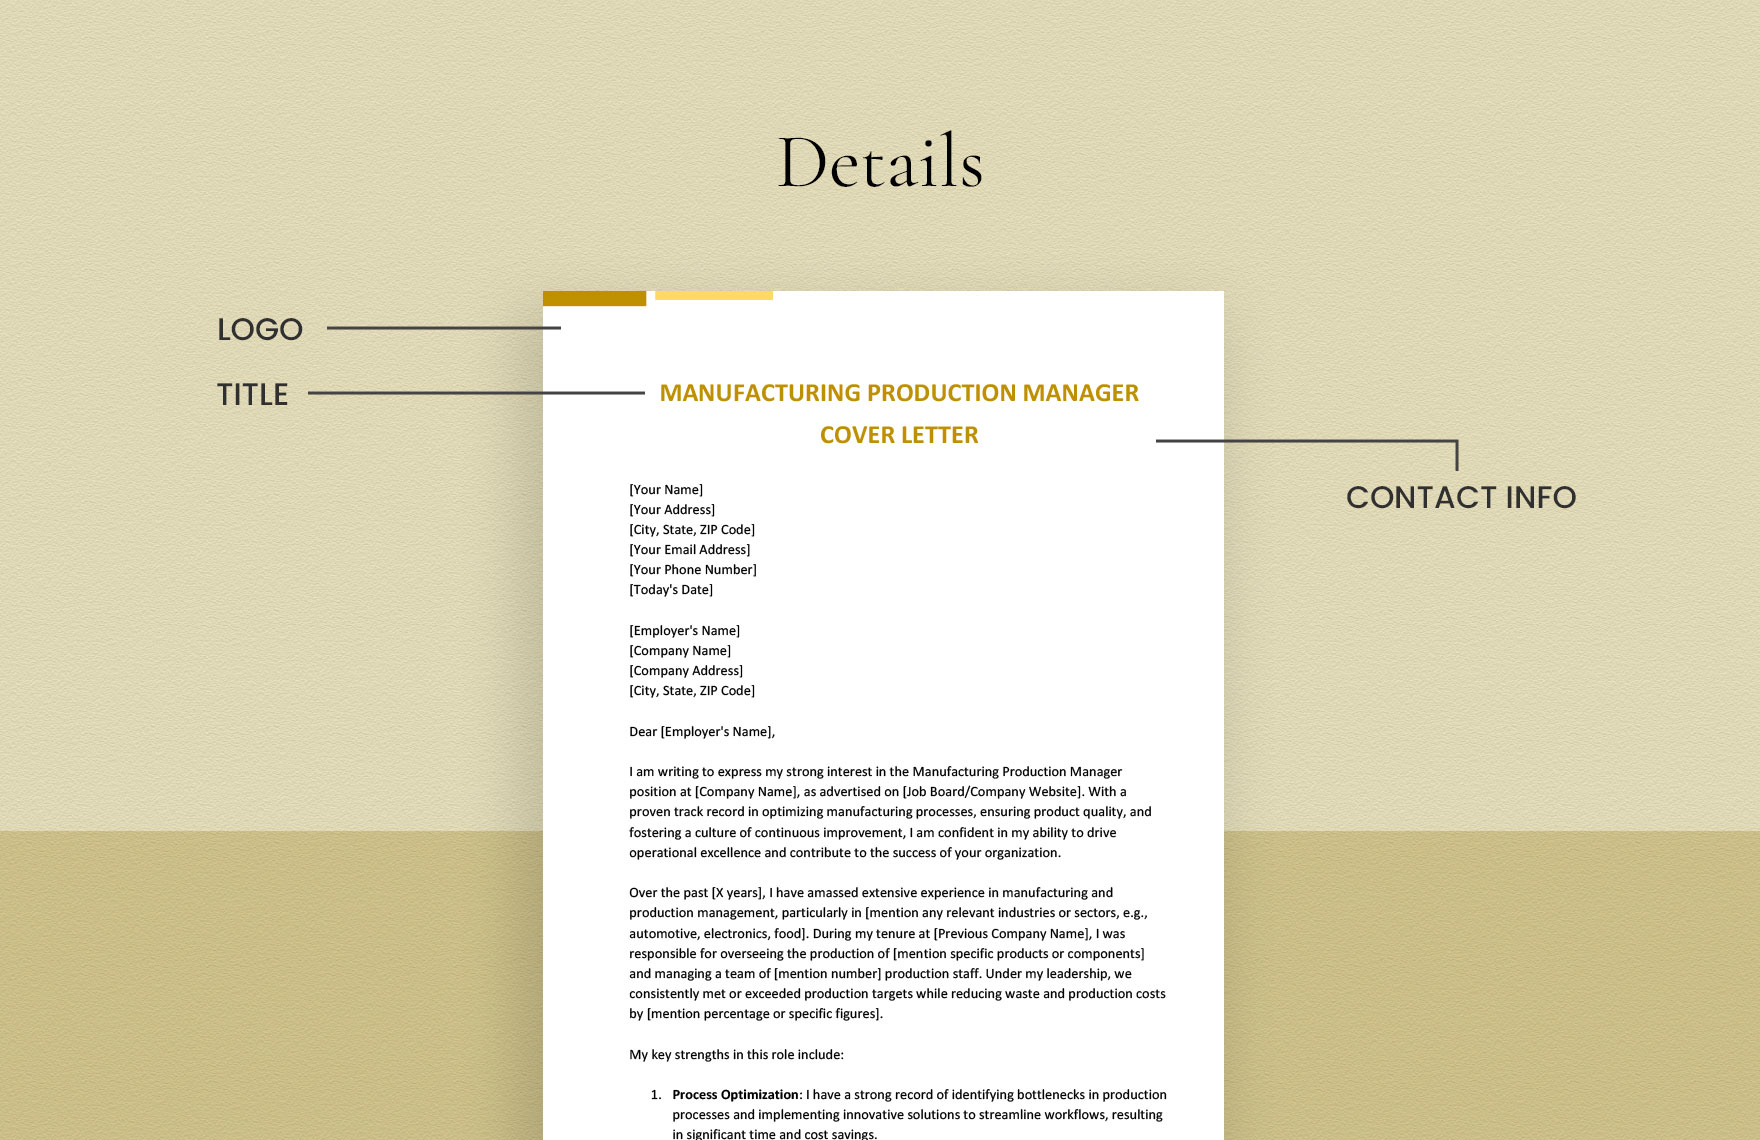 Manufacturing Production Manager Cover Letter